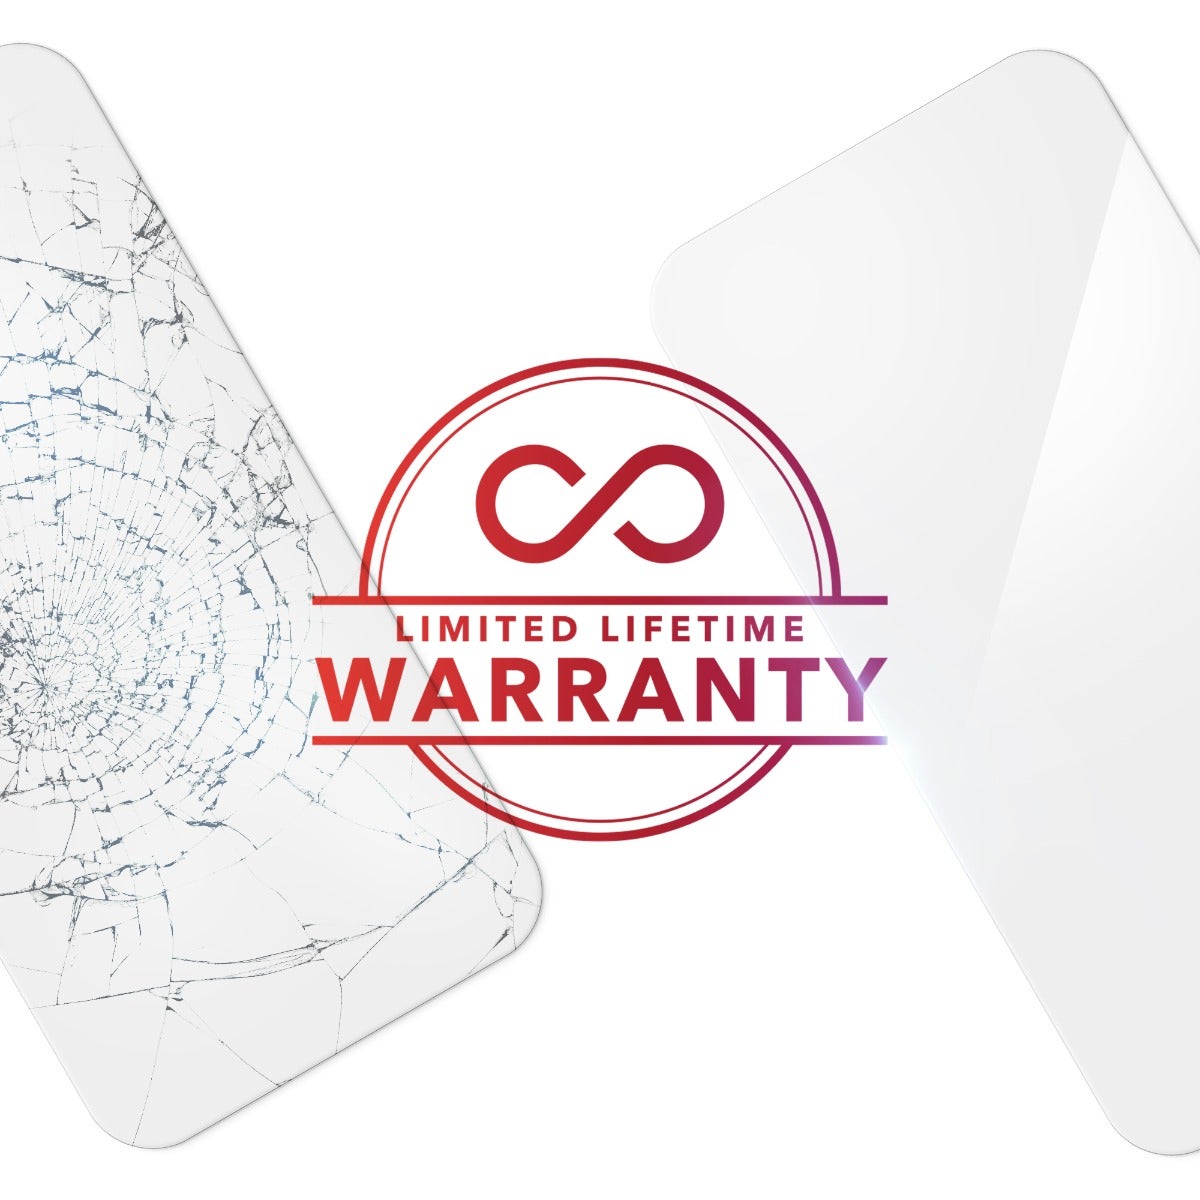 Limited Lifetime Warranty
||If your Glass Elite screen protector ever gets worn or damaged, we will replace it for as long as you own your device